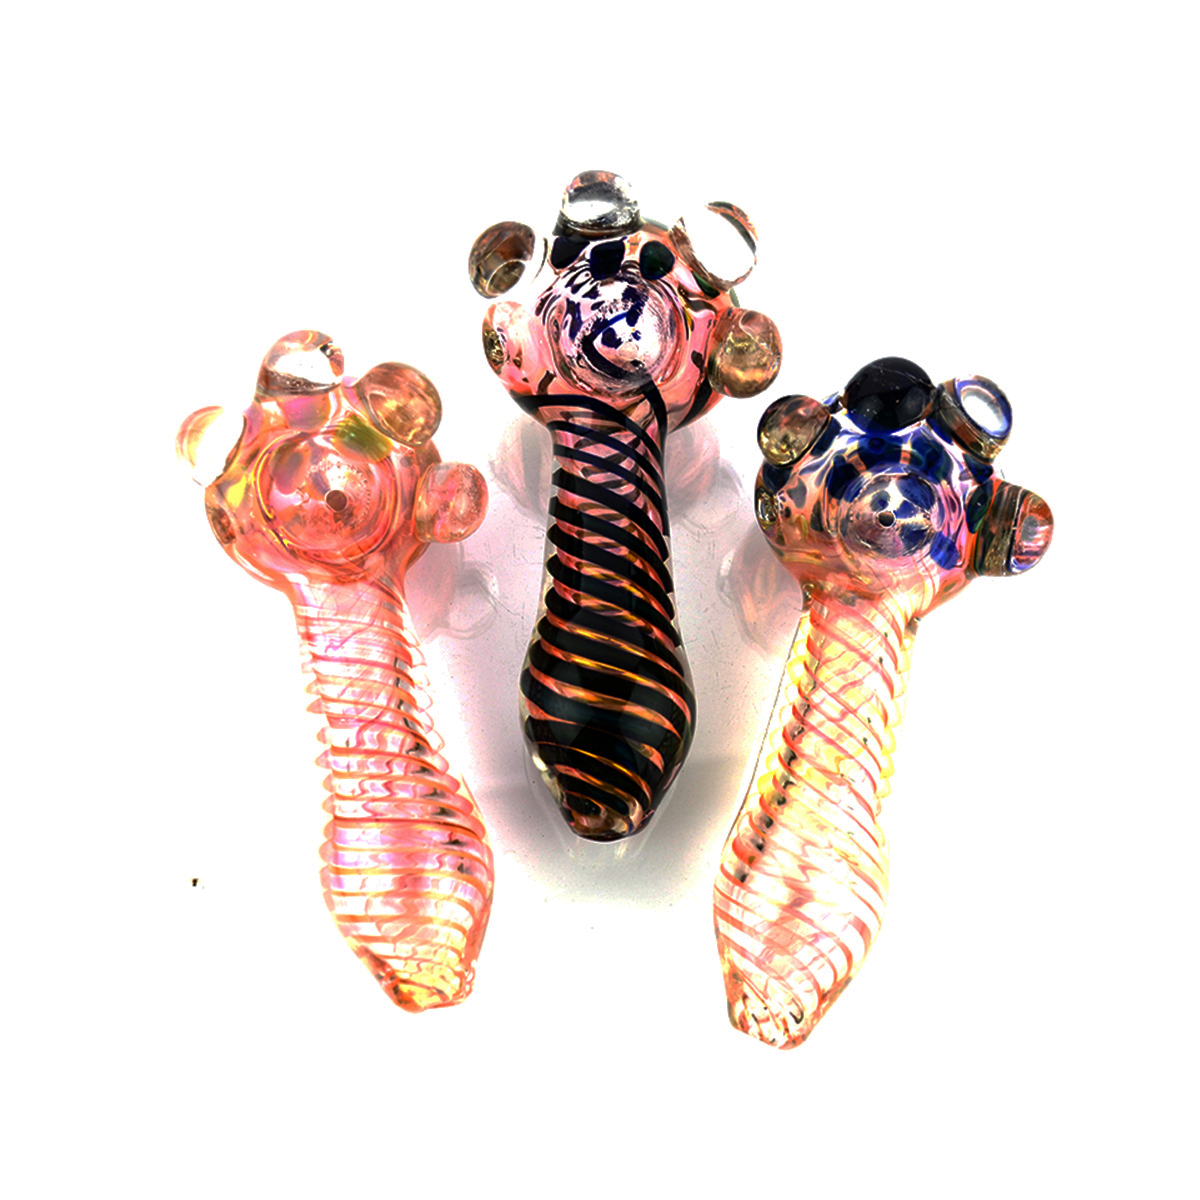 5" Gold Fume Hand Pipe With Swirling Art and Flower Head Design 200G